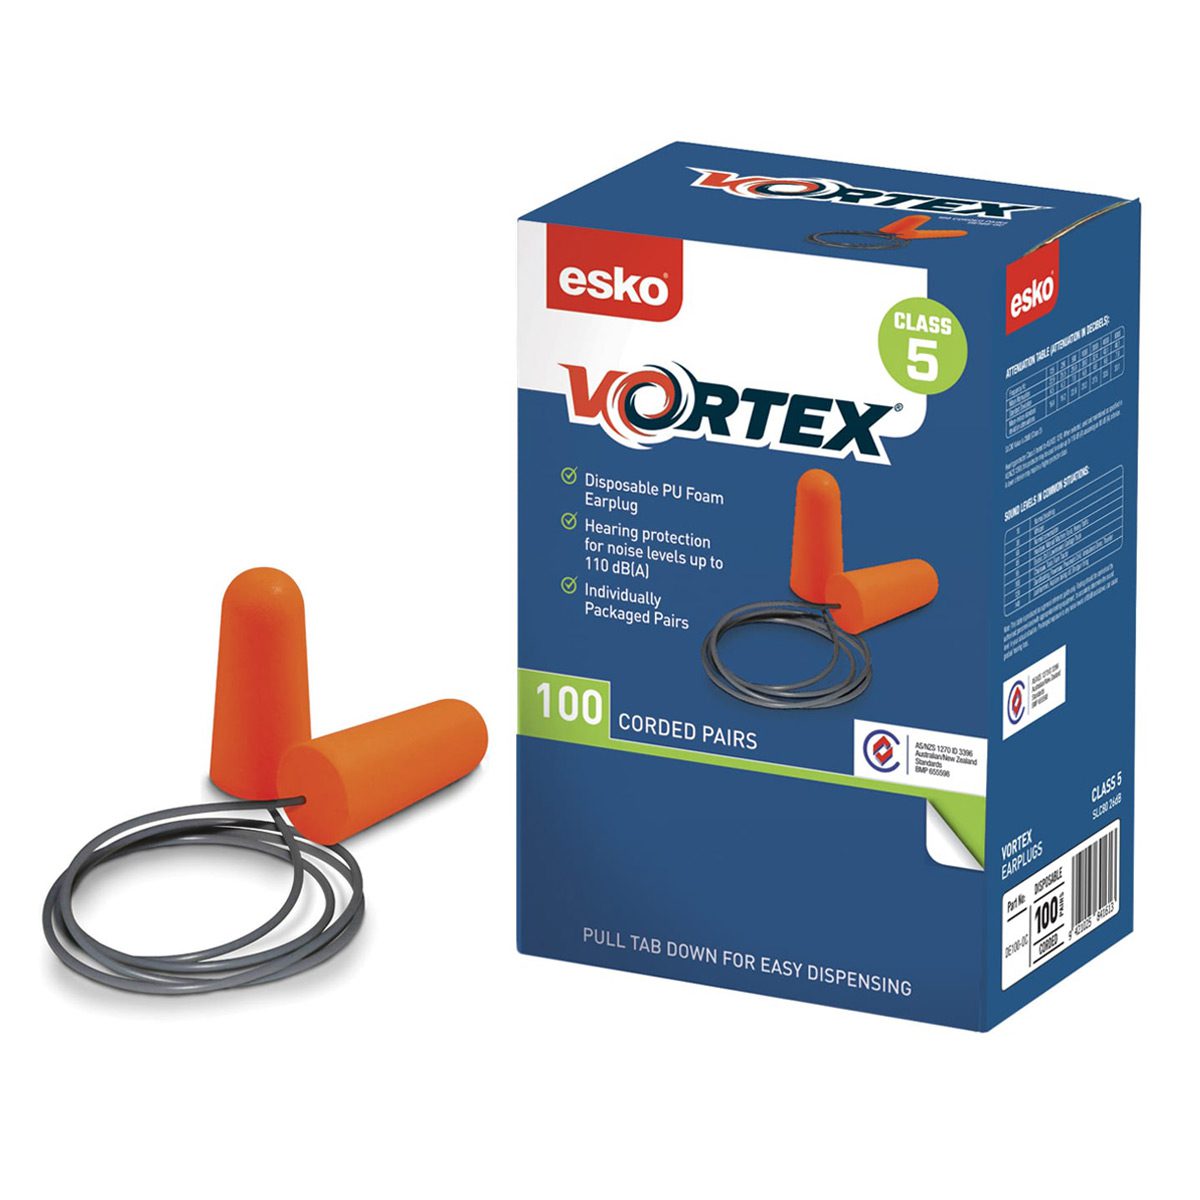 consumables-hospitality-safety-esko-vortex-corded-ear-plug-orange-x100-soft-easy-to-roll-positive-insertion-SLC80-26dB-protection-noise-levels-to-110-dB(A)-PU-foam-class-5-AS/NZS-vjs-distributors-DE100-OC